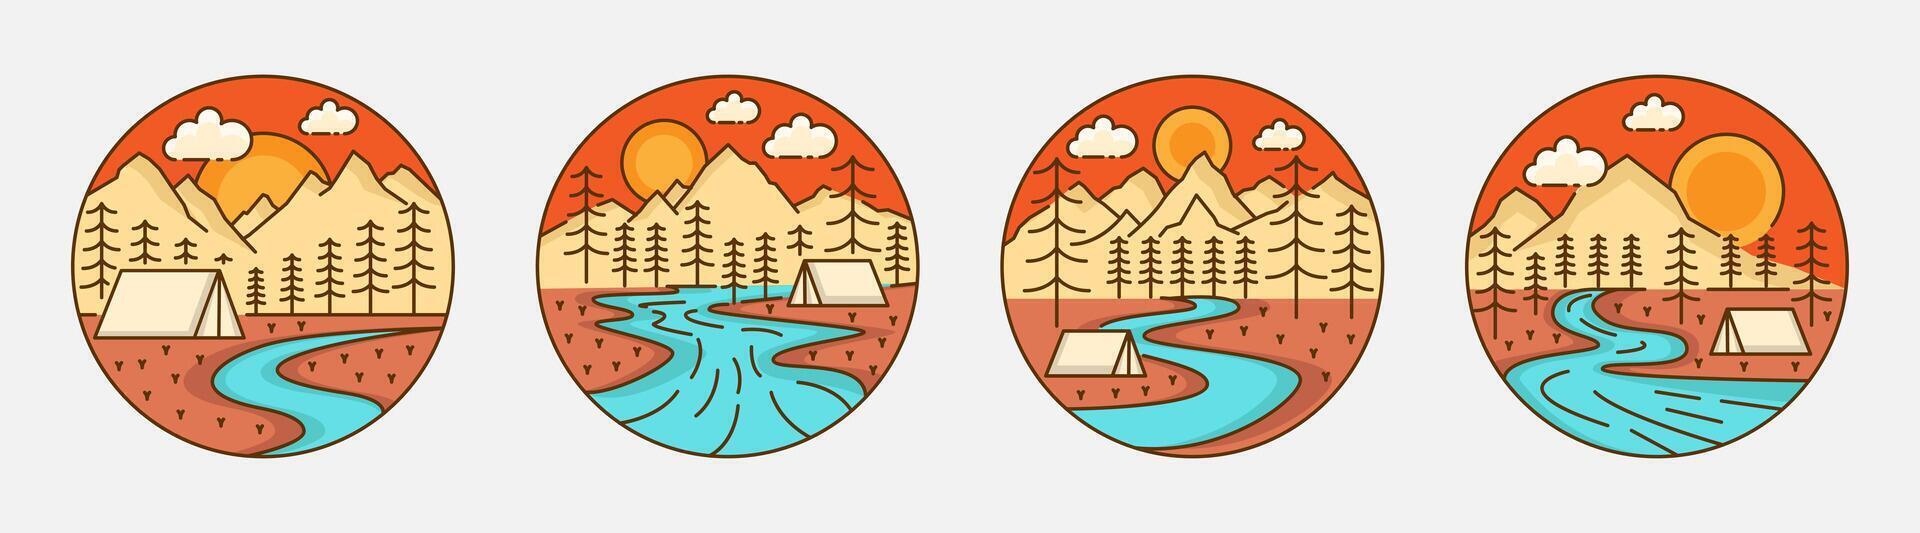 Collection of camping and mountain illustration with monoline or line art style, design can be for t-shirts, wrapping paper, printing needs vector